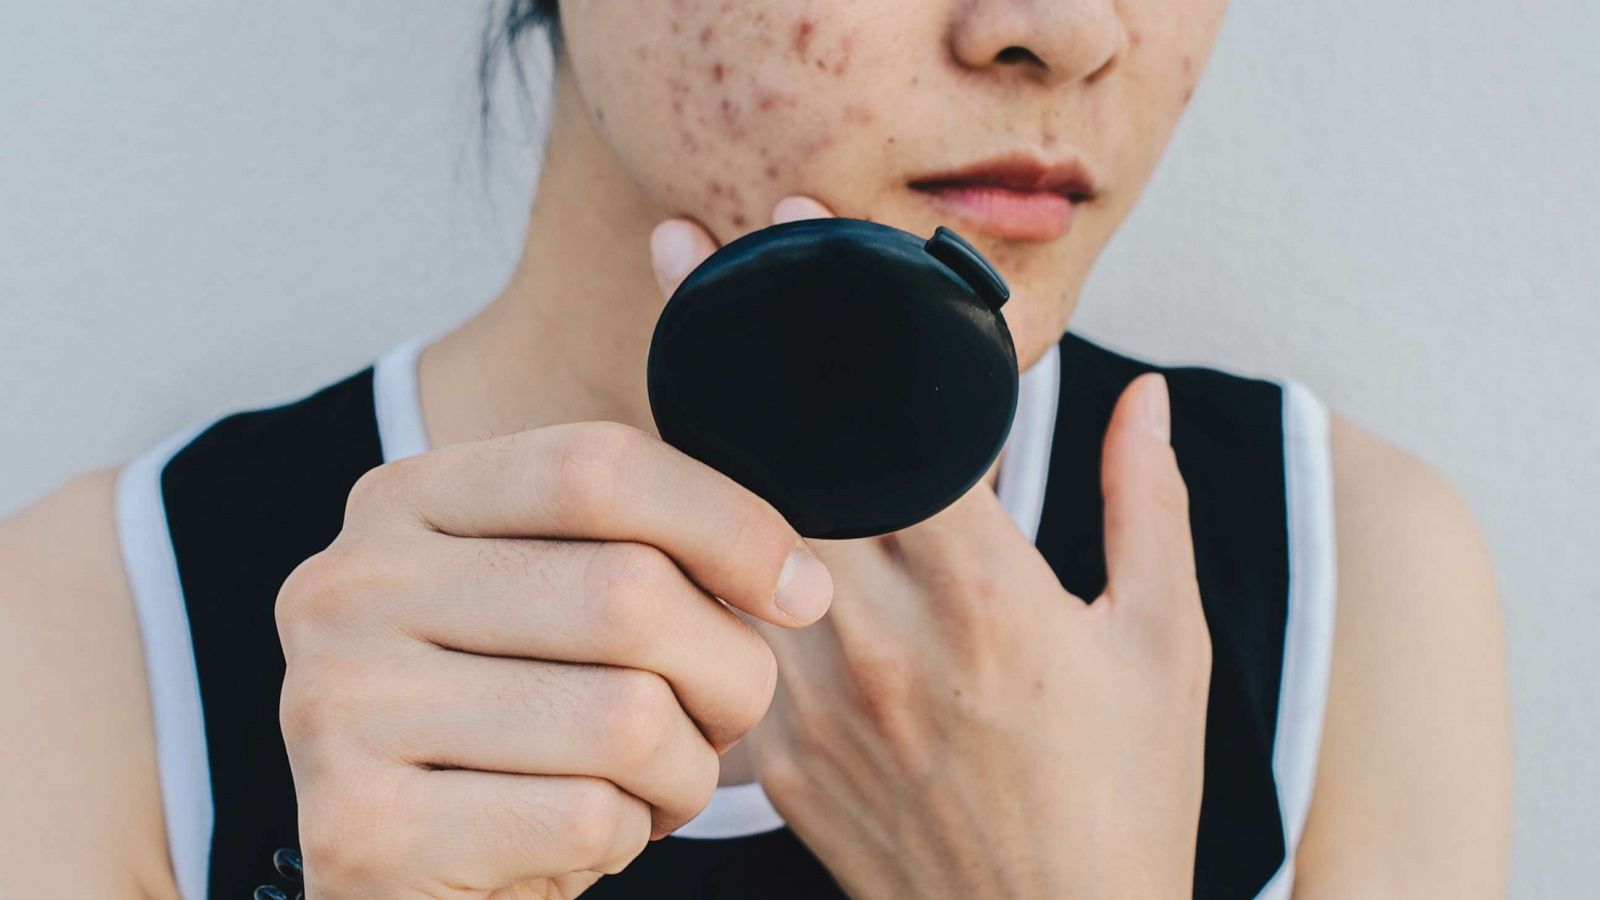 Acne Awareness Month: Shop these dermatologist-approved skin care